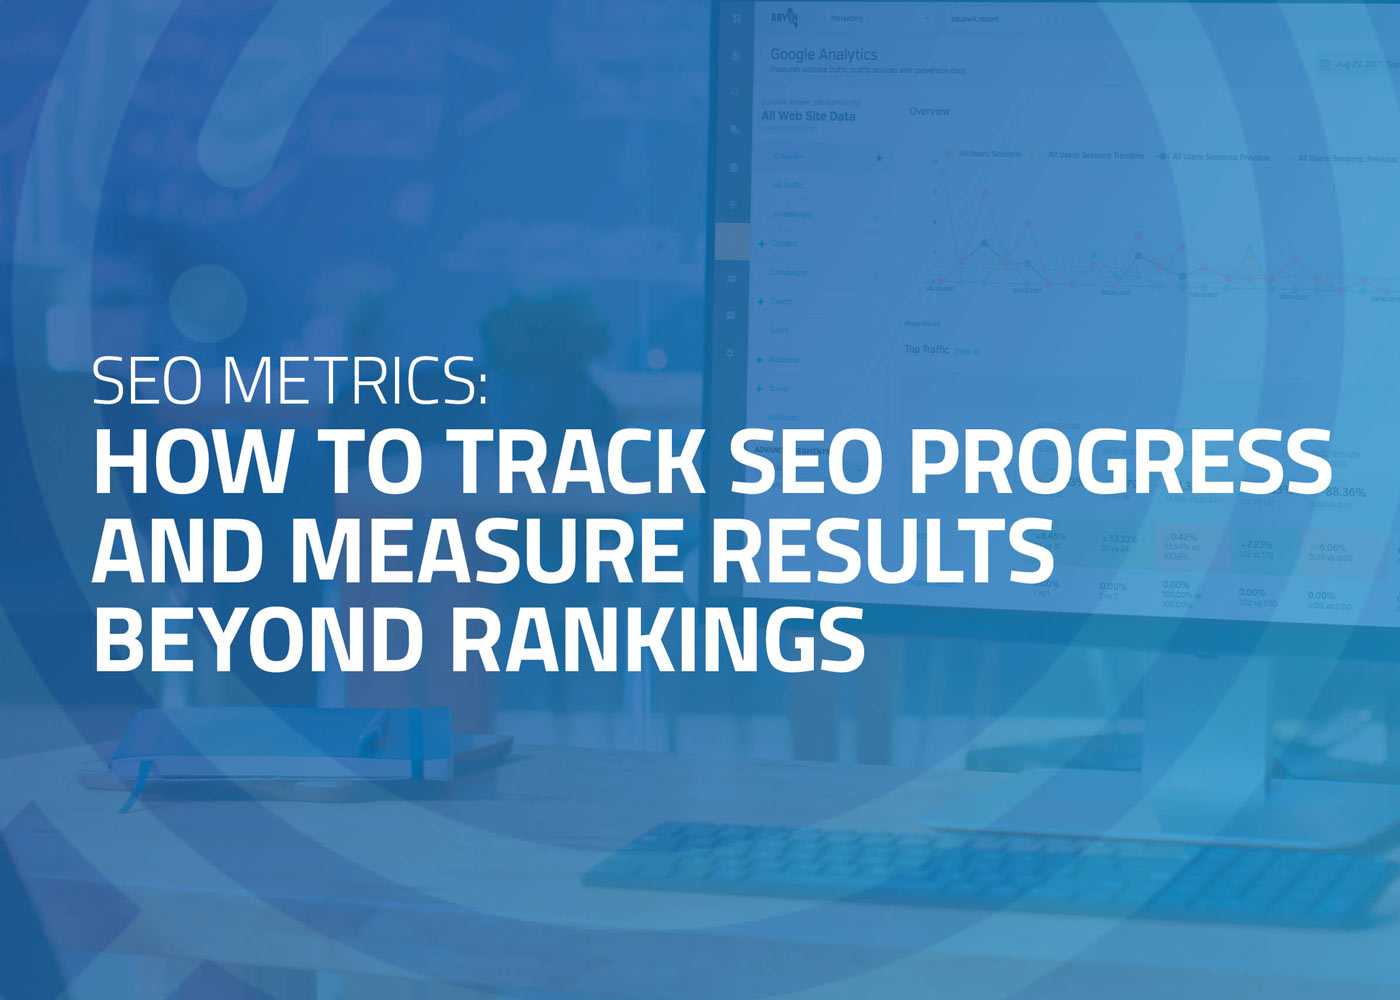 How to Track and Measure SEO Results